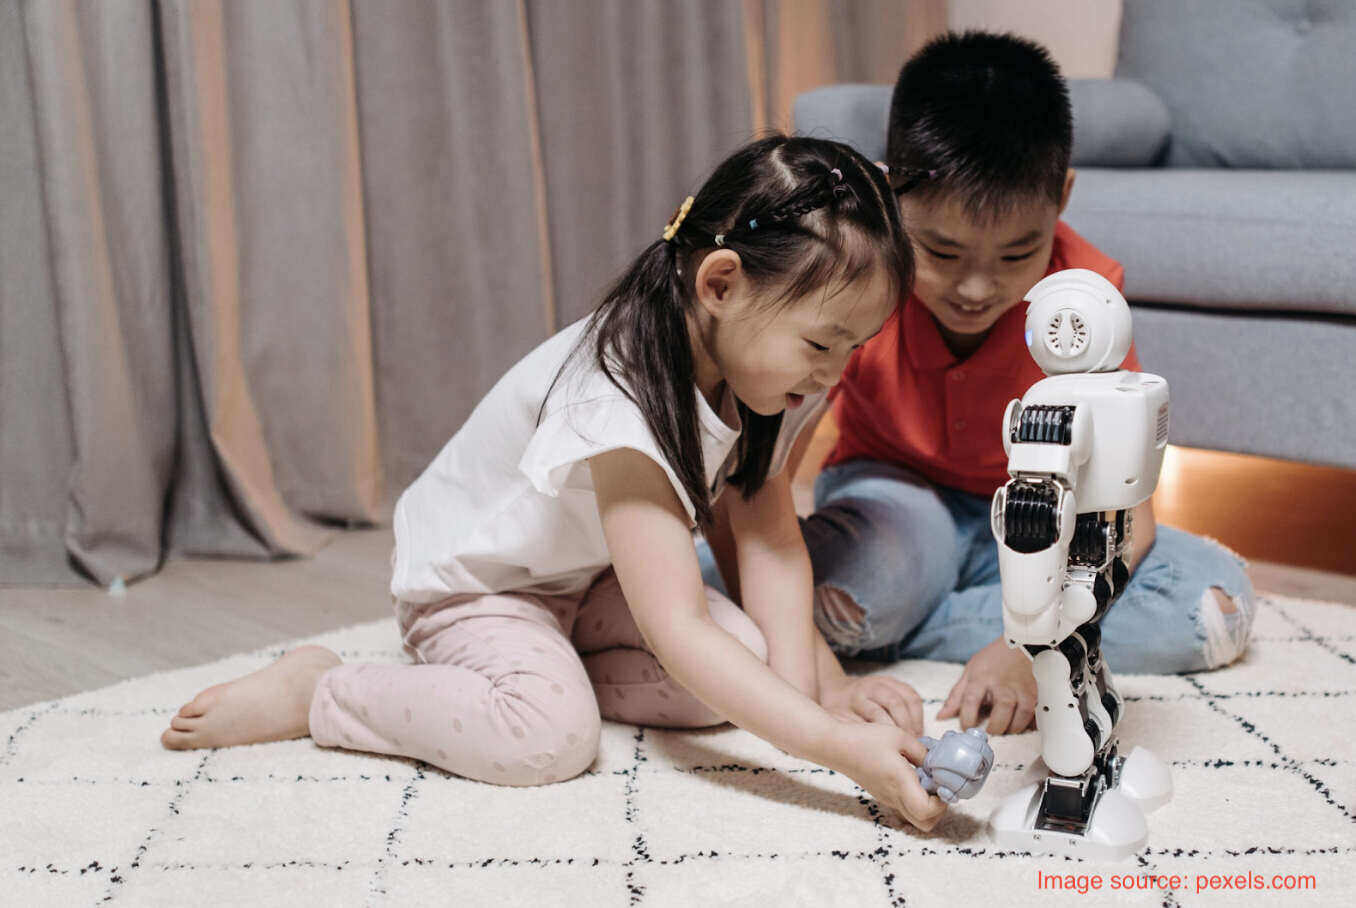 What are the Advantages of Encouraging STEM Learning to Kids